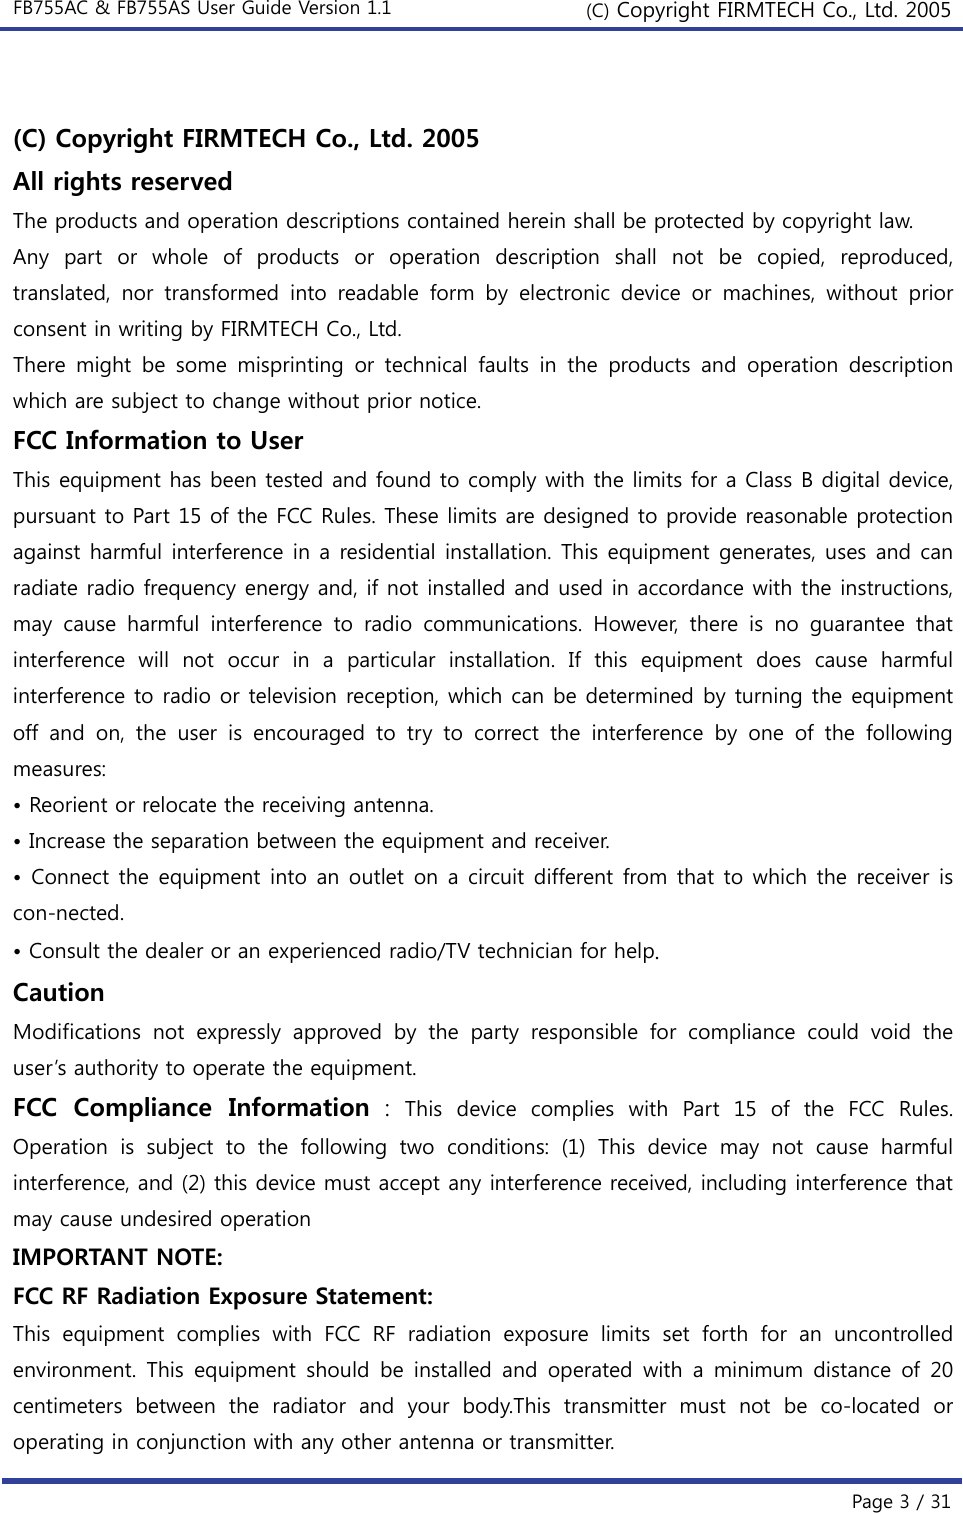 FB755AC &amp; FB755AS User Guide Version 1.1  (C) Copyright FIRMTECH Co., Ltd. 2005  Page 3 / 31  (C) Copyright FIRMTECH Co., Ltd. 2005 All rights reserved The products and operation descriptions contained herein shall be protected by copyright law.   Any part or whole of products or operation description shall not be copied, reproduced, translated,  nor  transformed  into  readable  form  by  electronic  device  or  machines,  without  prior consent in writing by FIRMTECH Co., Ltd. There might be some misprinting or technical faults in the products  and  operation  description which are subject to change without prior notice. FCC Information to User This equipment has been tested and found to comply with the limits for a Class B digital device, pursuant to Part 15 of the FCC Rules. These limits are designed to provide reasonable protection against harmful interference in a residential installation. This equipment generates, uses and can radiate radio frequency energy and, if not installed and used in accordance with the instructions, may  cause  harmful  interference  to  radio  communications.  However,  there  is  no  guarantee  that interference  will  not  occur  in  a  particular  installation.  If  this  equipment  does  cause  harmful interference to radio or television reception, which can be determined by turning the equipment off  and  on,  the  user  is  encouraged to try to correct the interference  by  one  of  the  following measures: • Reorient or relocate the receiving antenna. • Increase the separation between the equipment and receiver. • Connect the equipment into an outlet on a circuit different from that to which the receiver is con-nected. • Consult the dealer or an experienced radio/TV technician for help. Caution Modifications  not  expressly  approved  by  the  party  responsible  for  compliance  could  void  the user’s authority to operate the equipment. FCC  Compliance  Information : This device complies with Part 15 of the FCC Rules. Operation  is  subject  to  the  following  two  conditions:  (1)  This  device may not cause harmful interference, and (2) this device must accept any interference received, including interference that may cause undesired operation IMPORTANT NOTE: FCC RF Radiation Exposure Statement: This  equipment  complies  with  FCC  RF  radiation  exposure  limits  set forth for an uncontrolled environment.  This  equipment  should be  installed  and  operated  with  a  minimum  distance  of 20 centimeters  between  the  radiator  and  your  body.This  transmitter  must  not  be  co-located  or operating in conjunction with any other antenna or transmitter. 